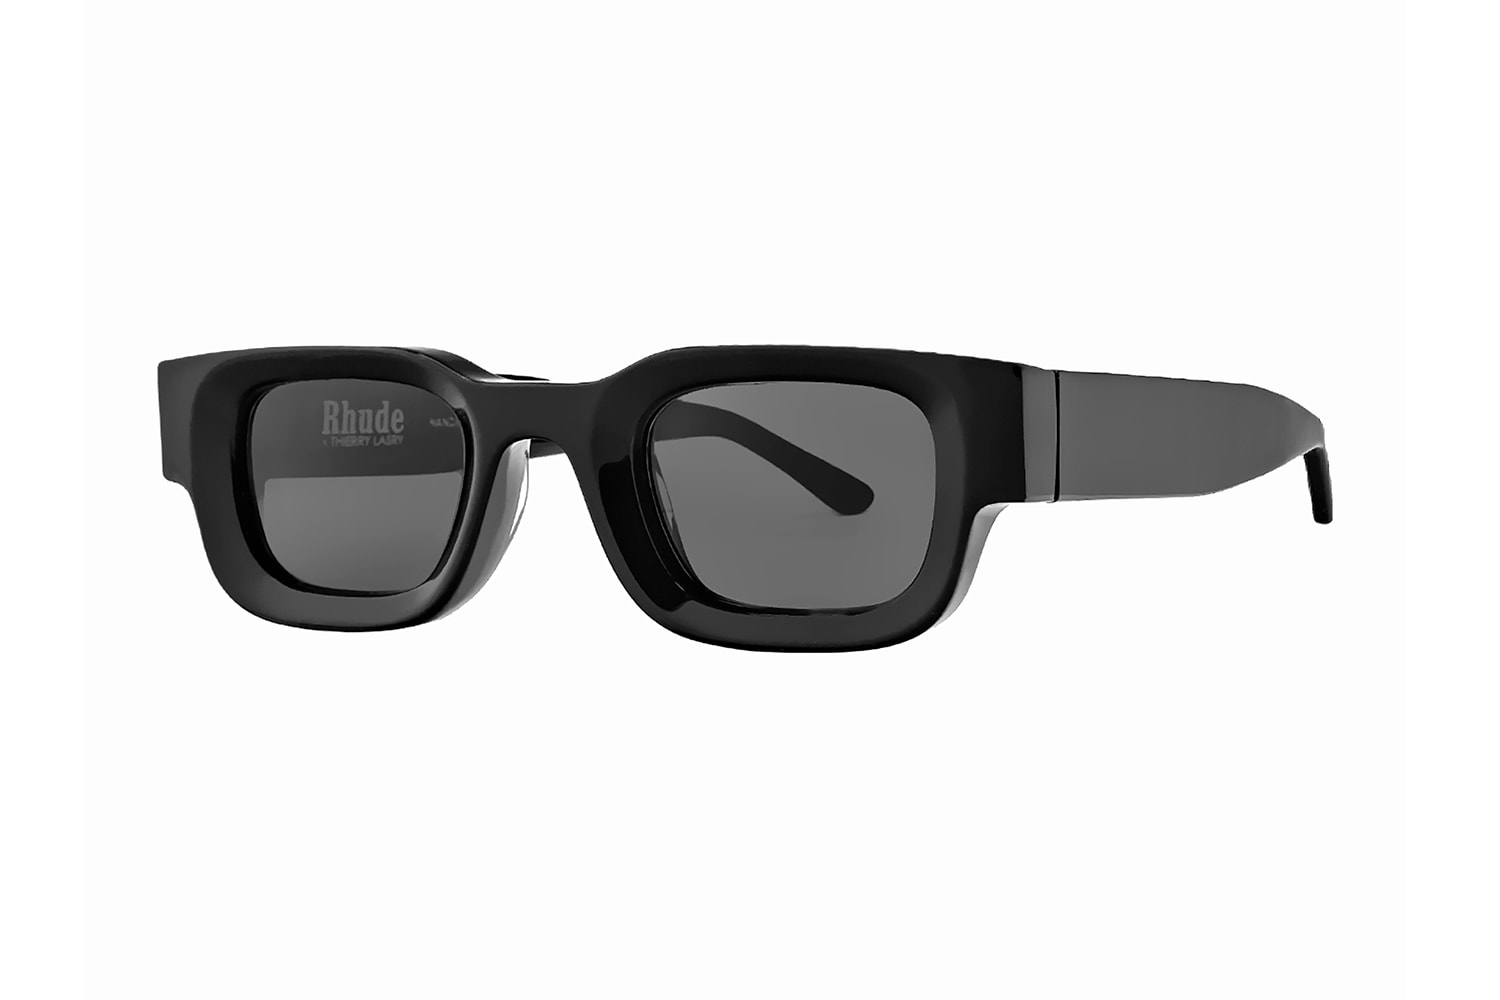 RHUDE Thierry Lasry RHEVISION Collection Release Info Date Buy Price